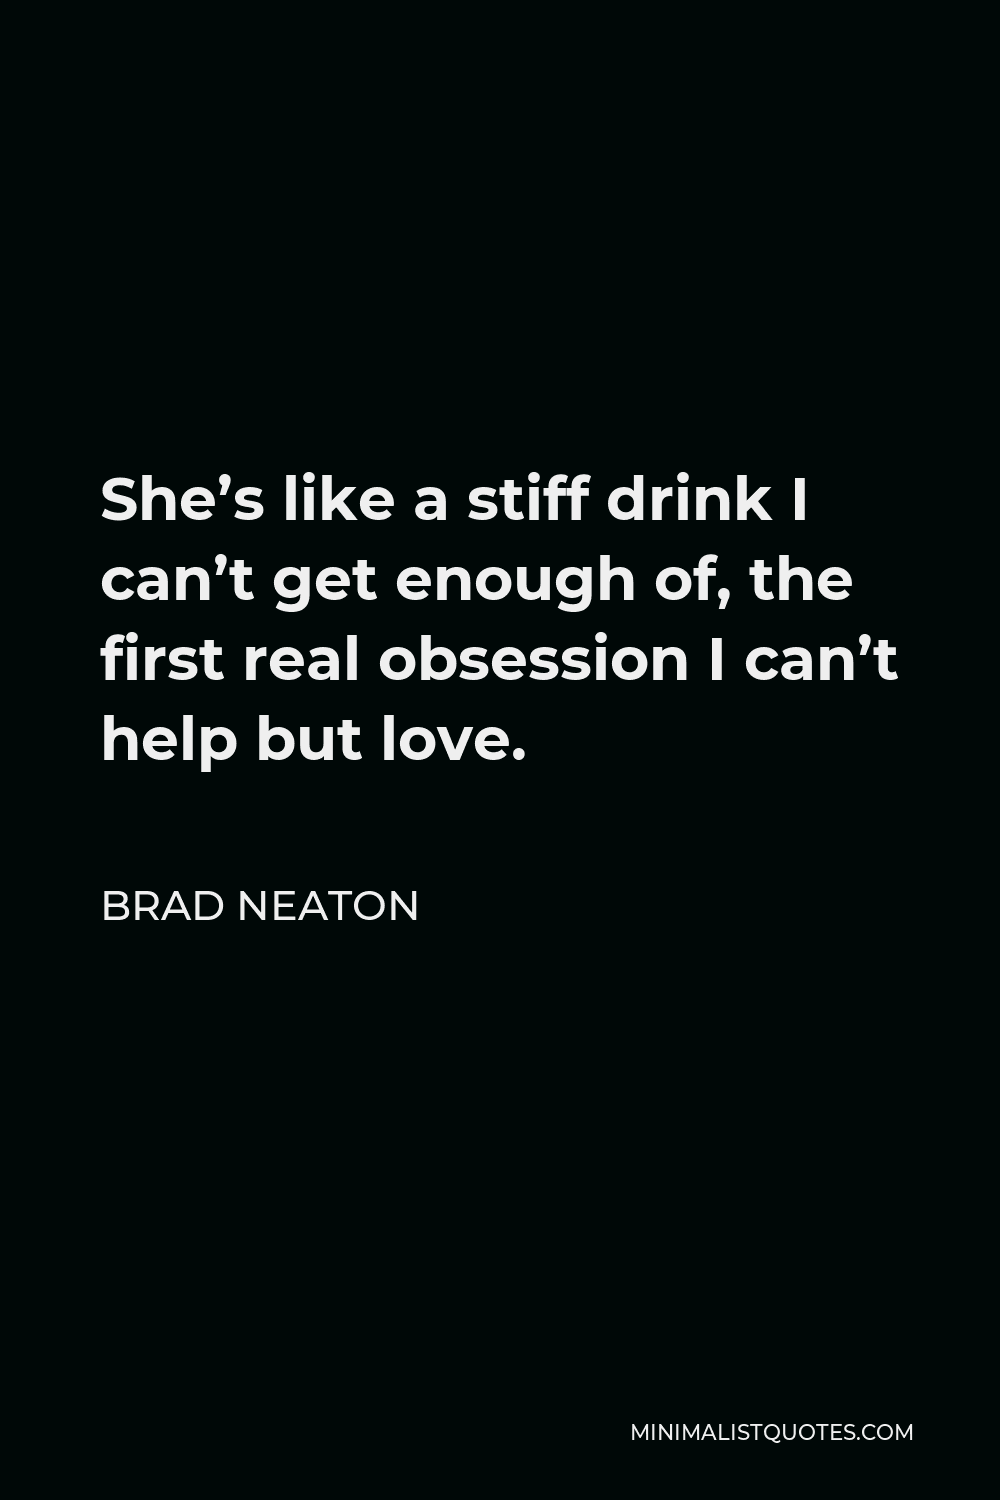 Brad Neaton Quote - She’s like a stiff drink I can’t get enough of, the first real obsession I can’t help but love.